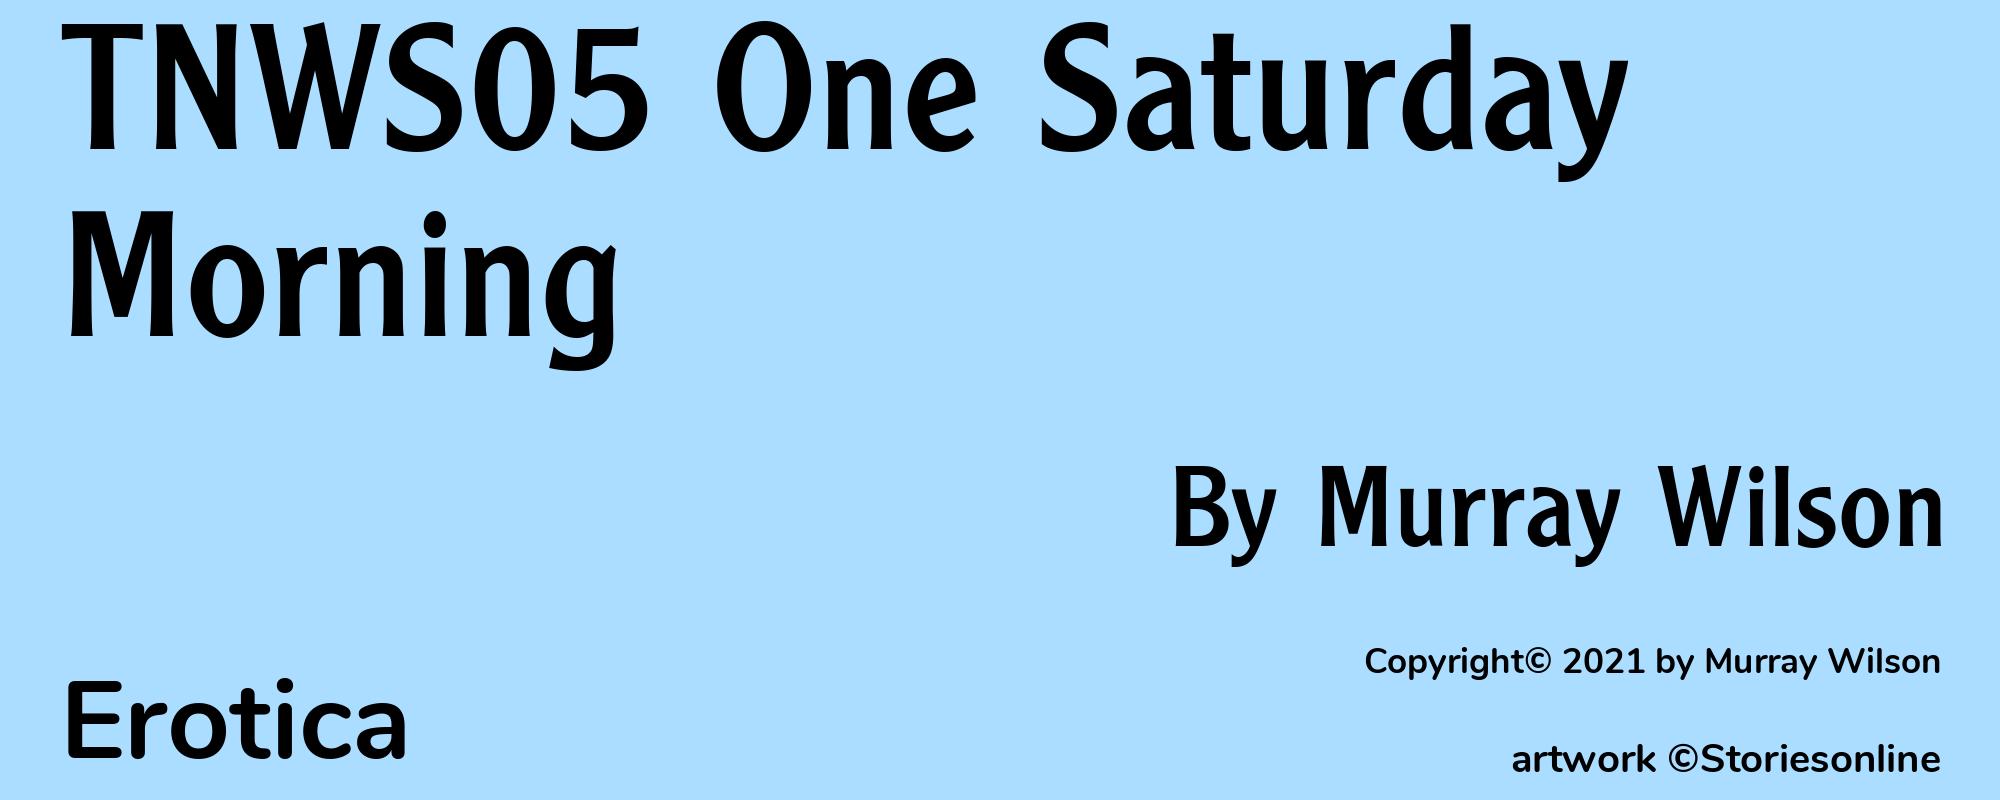 TNWS05 One Saturday Morning - Cover